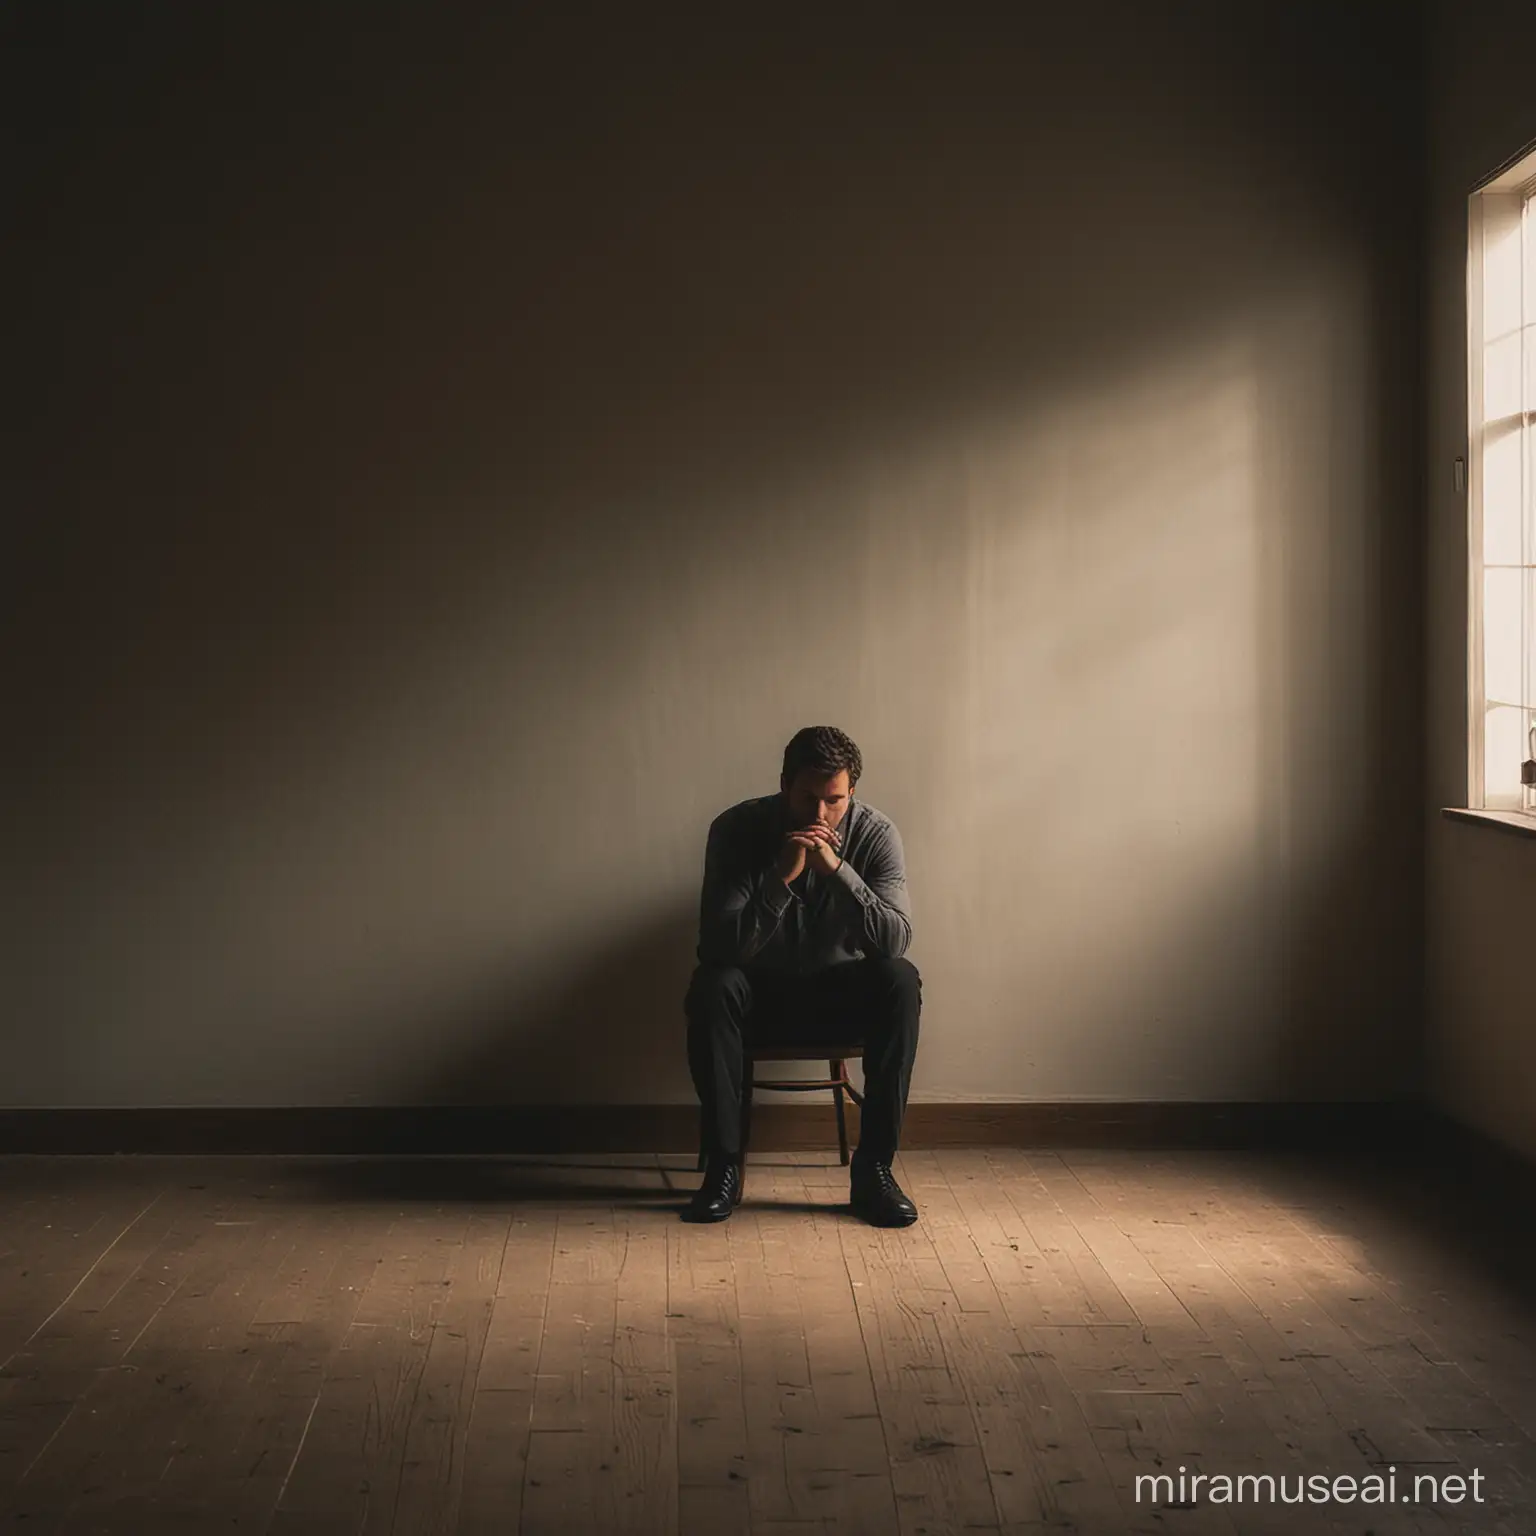 A man sitting alone in a dimly lit room, looking contemplative and deep in thought